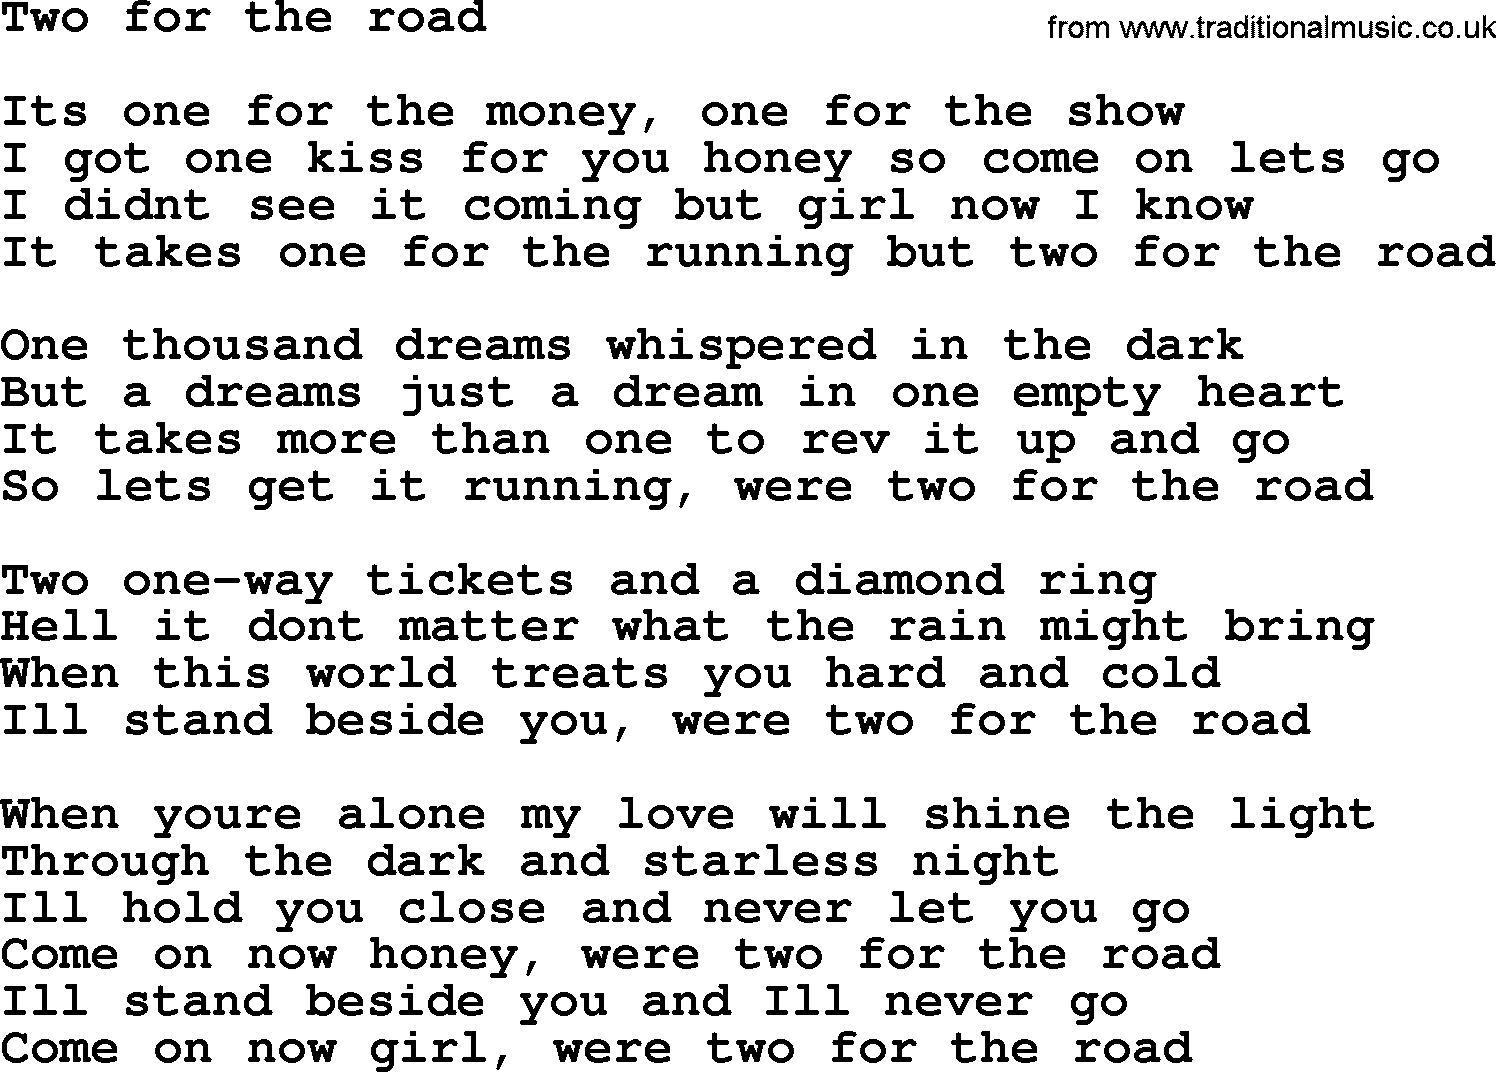 Bruce Springsteen song: Two For The Road lyrics